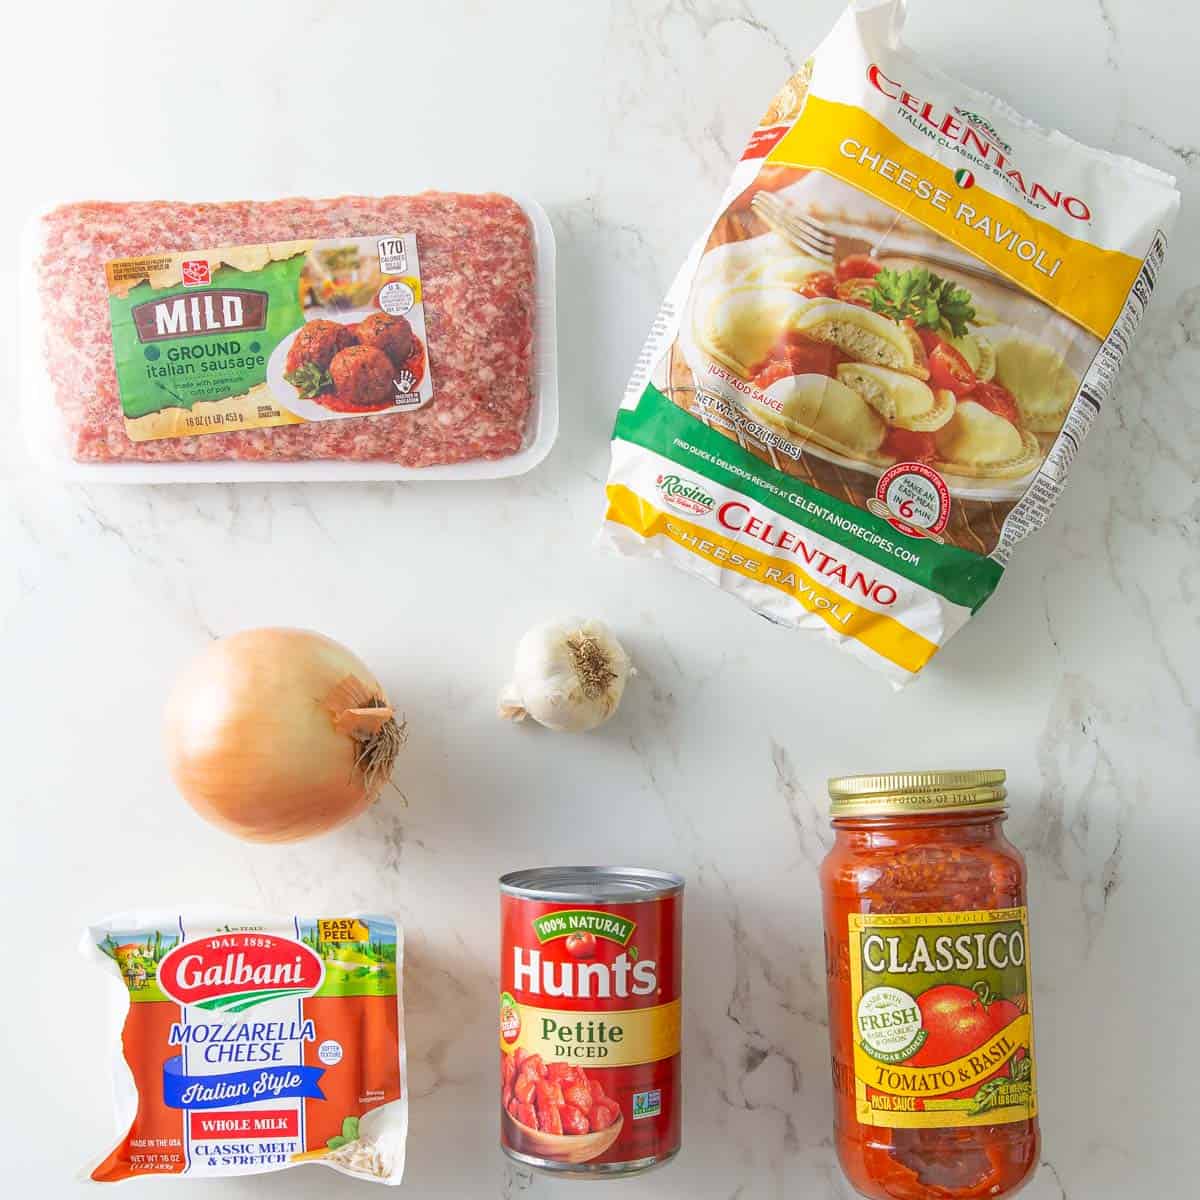 Ingredients for baked ravioli on a white marble surface.